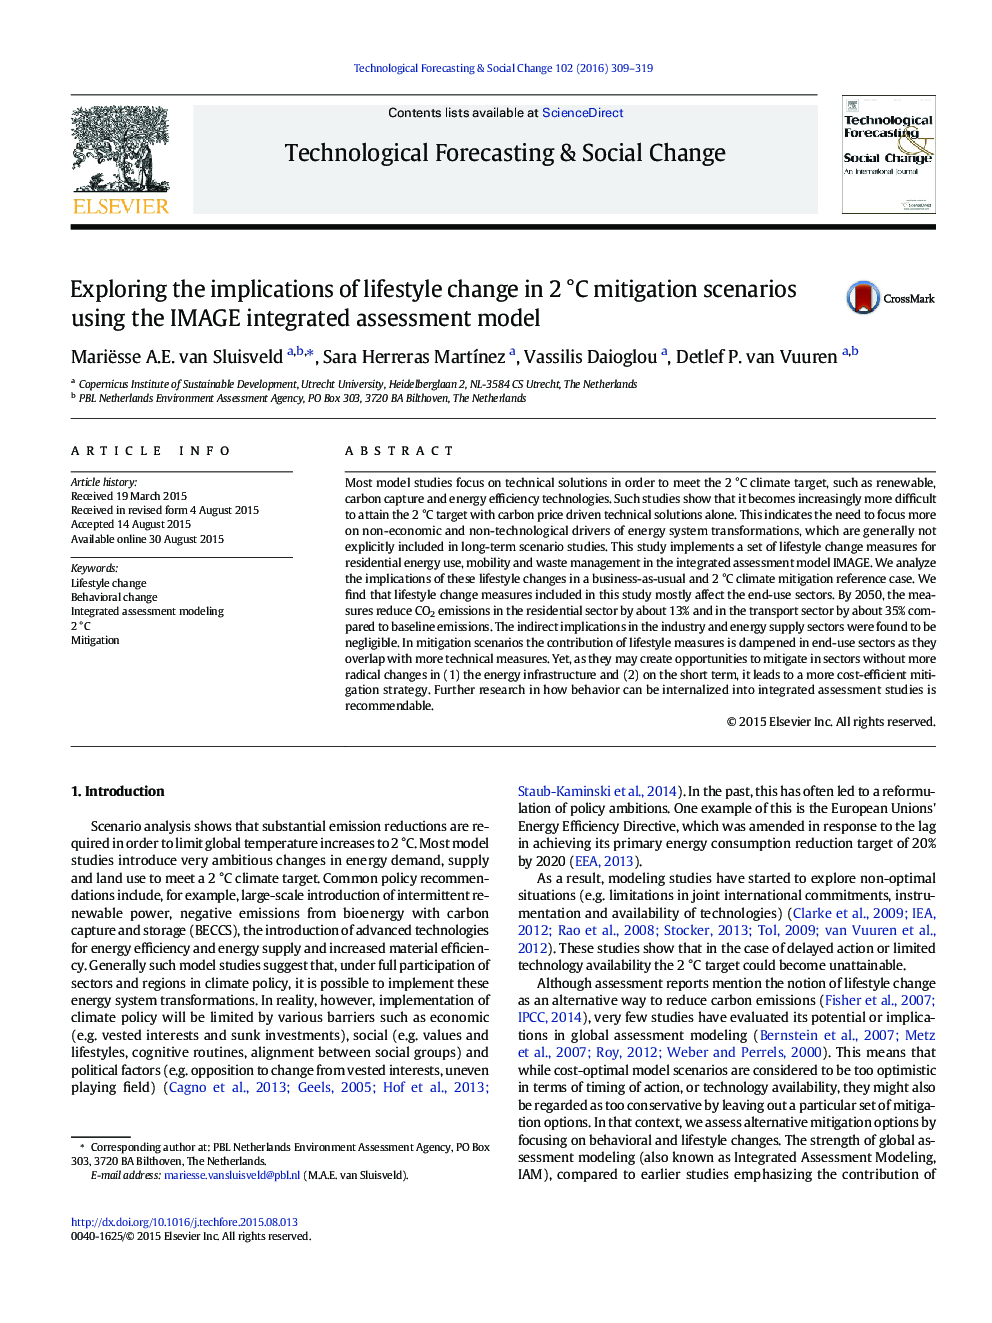 Exploring the implications of lifestyle change in 2Â Â°C mitigation scenarios using the IMAGE integrated assessment model